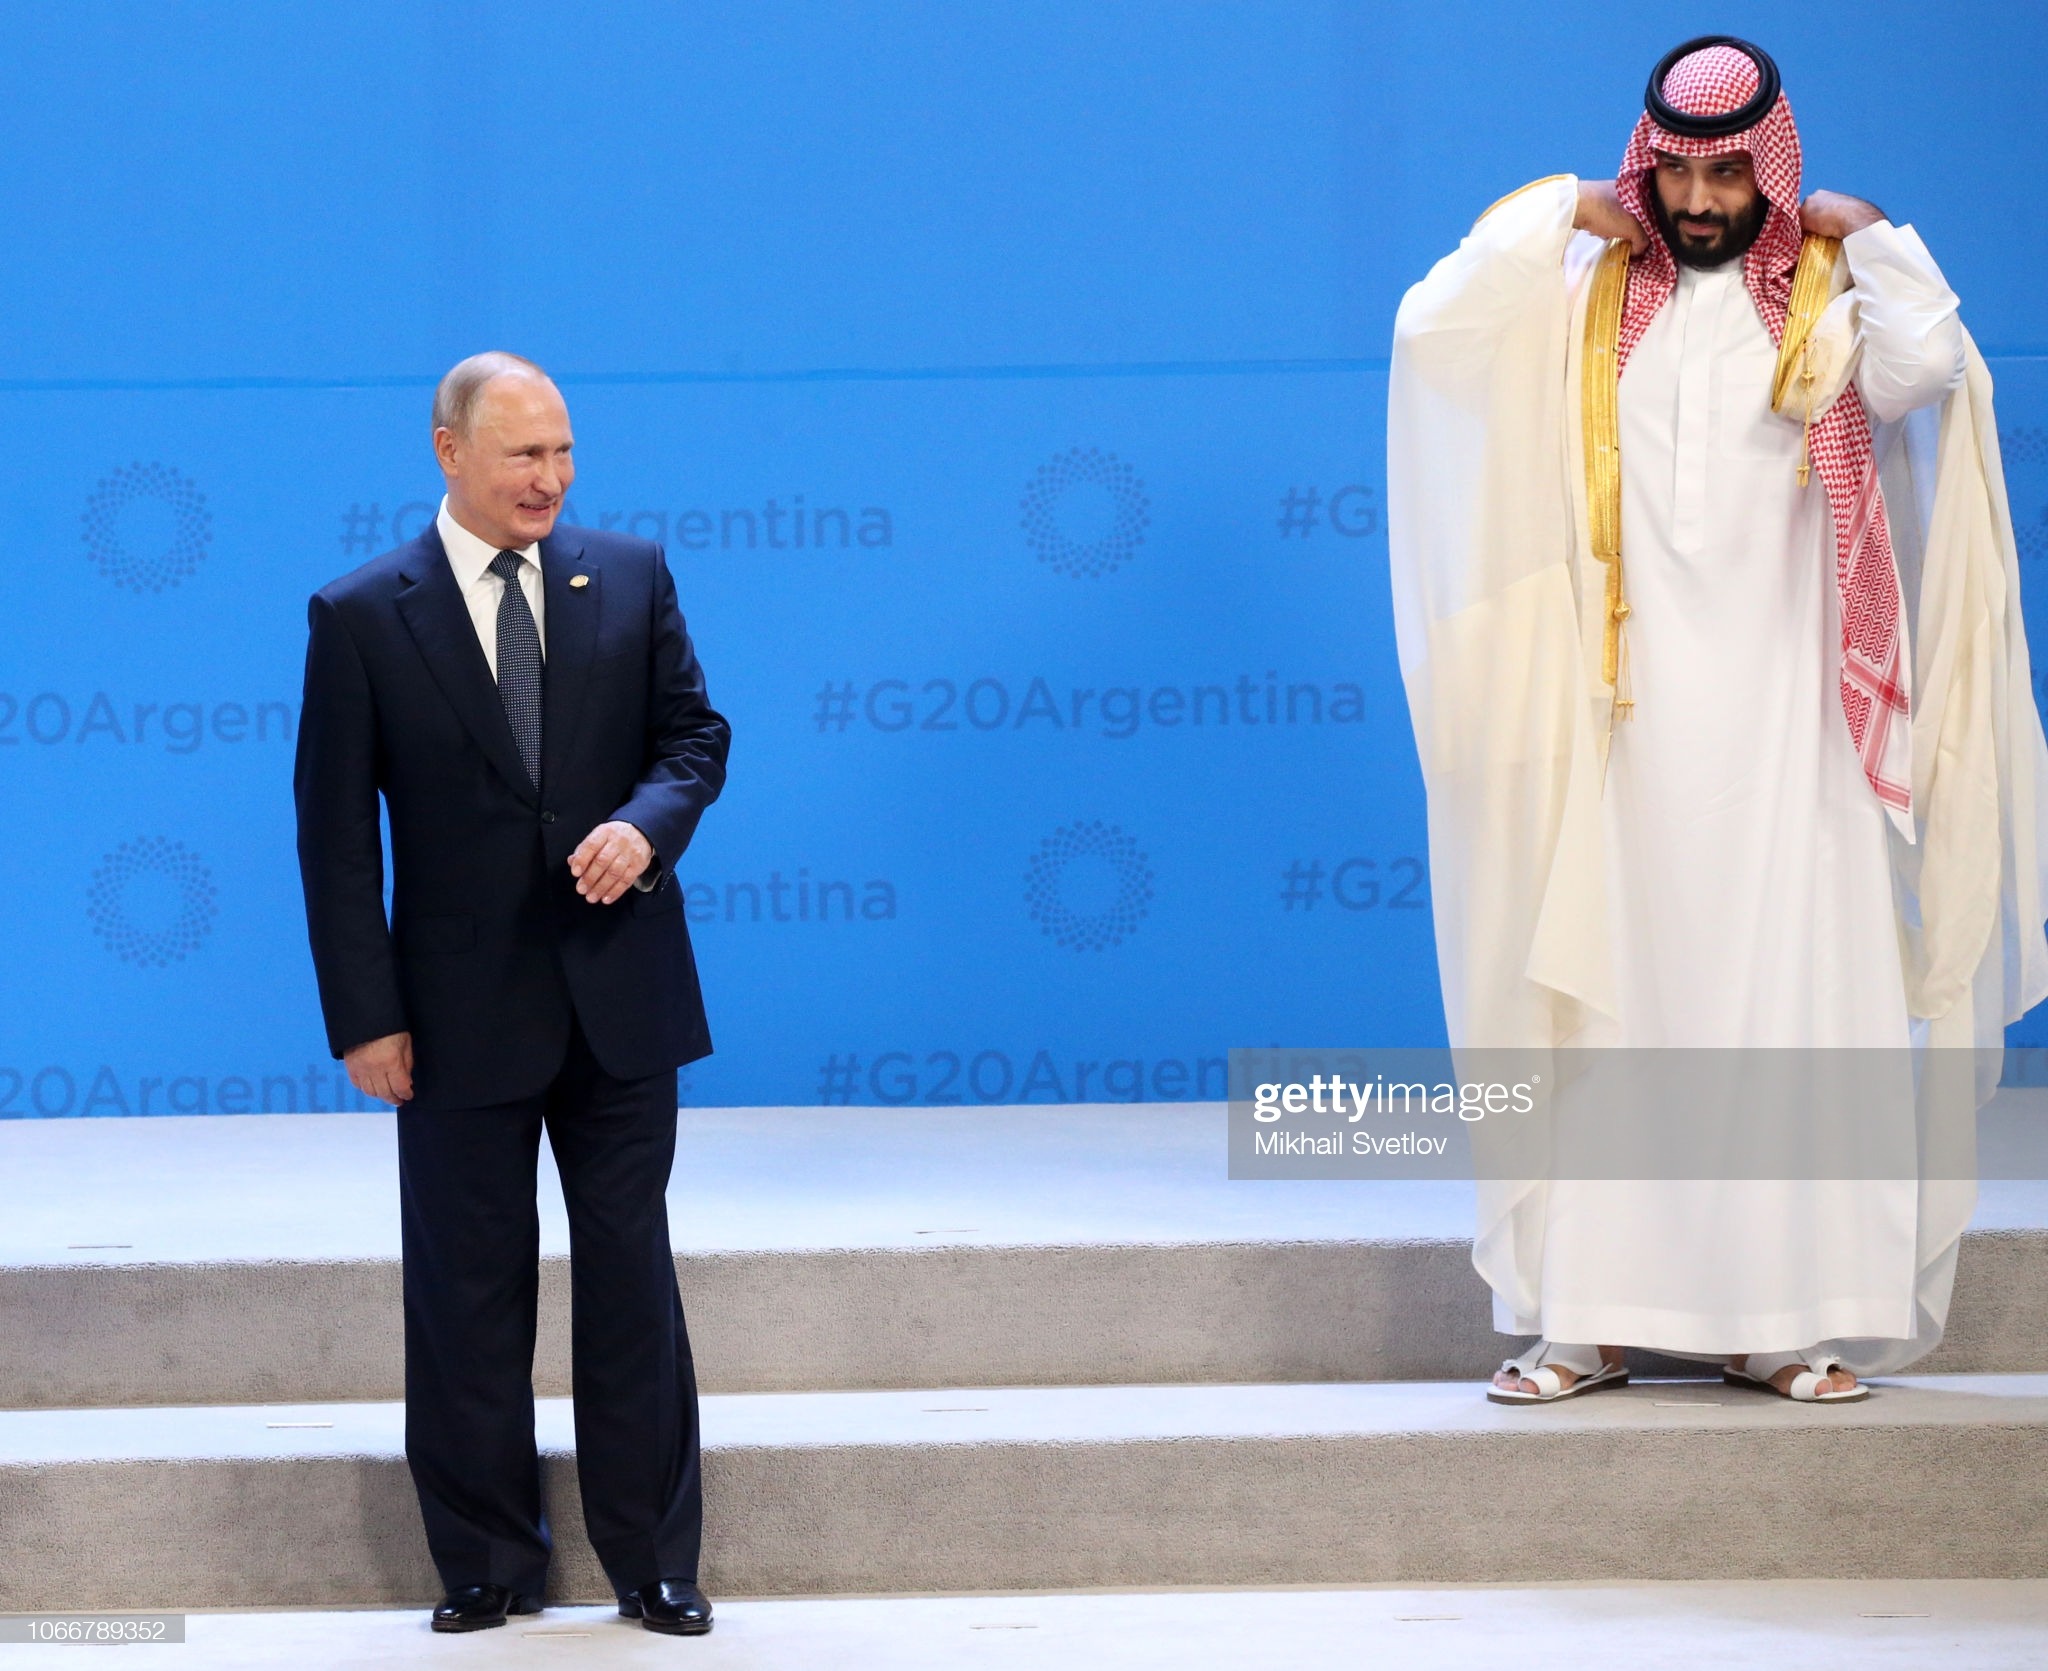 Oil and gas: Saudi Arabia and Russia try new approaches